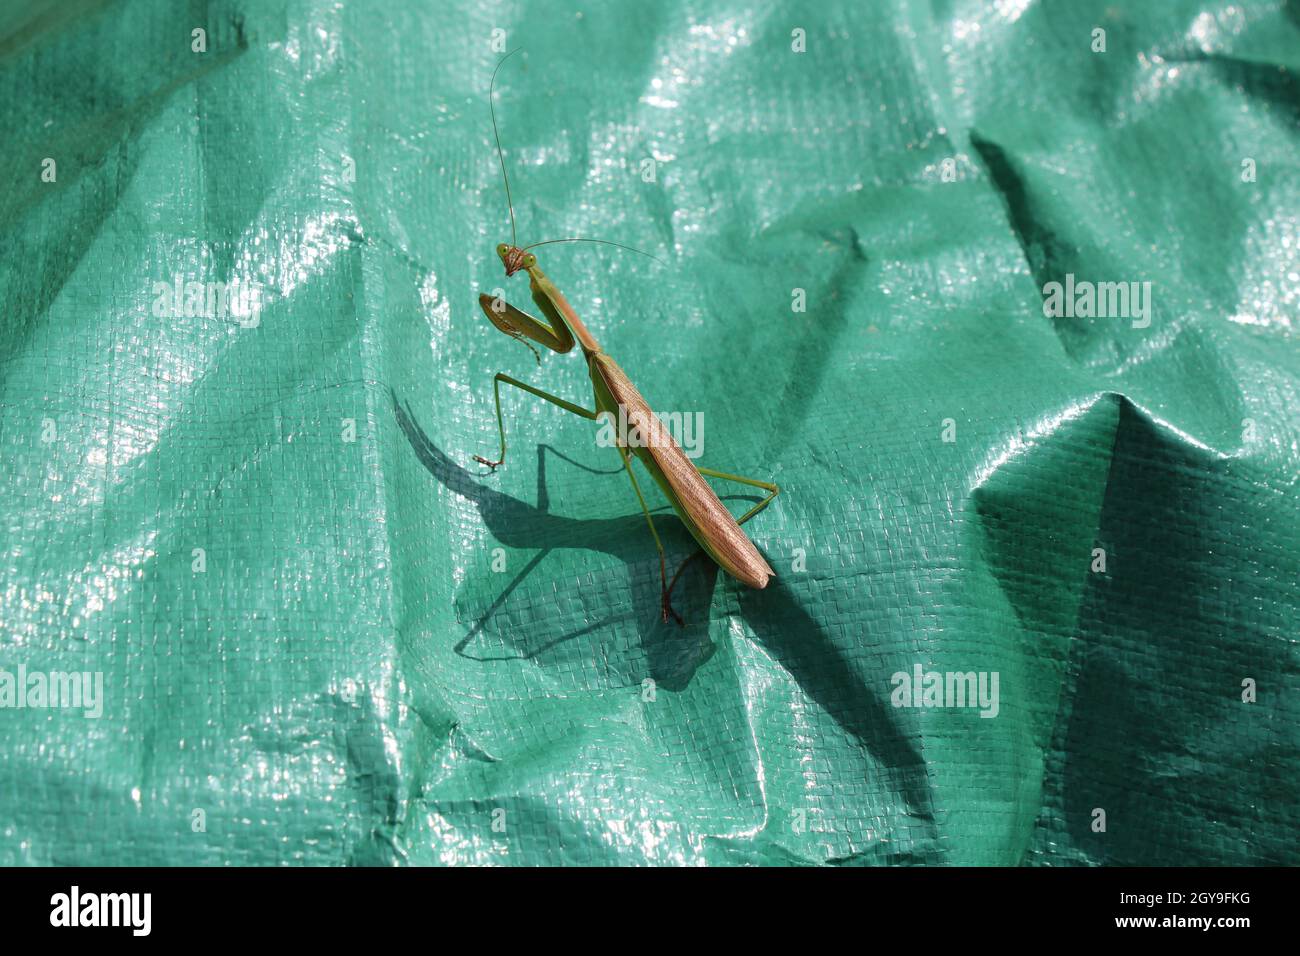 A Large Praying Mantis Looking Directly at the Viewer Stock Photo